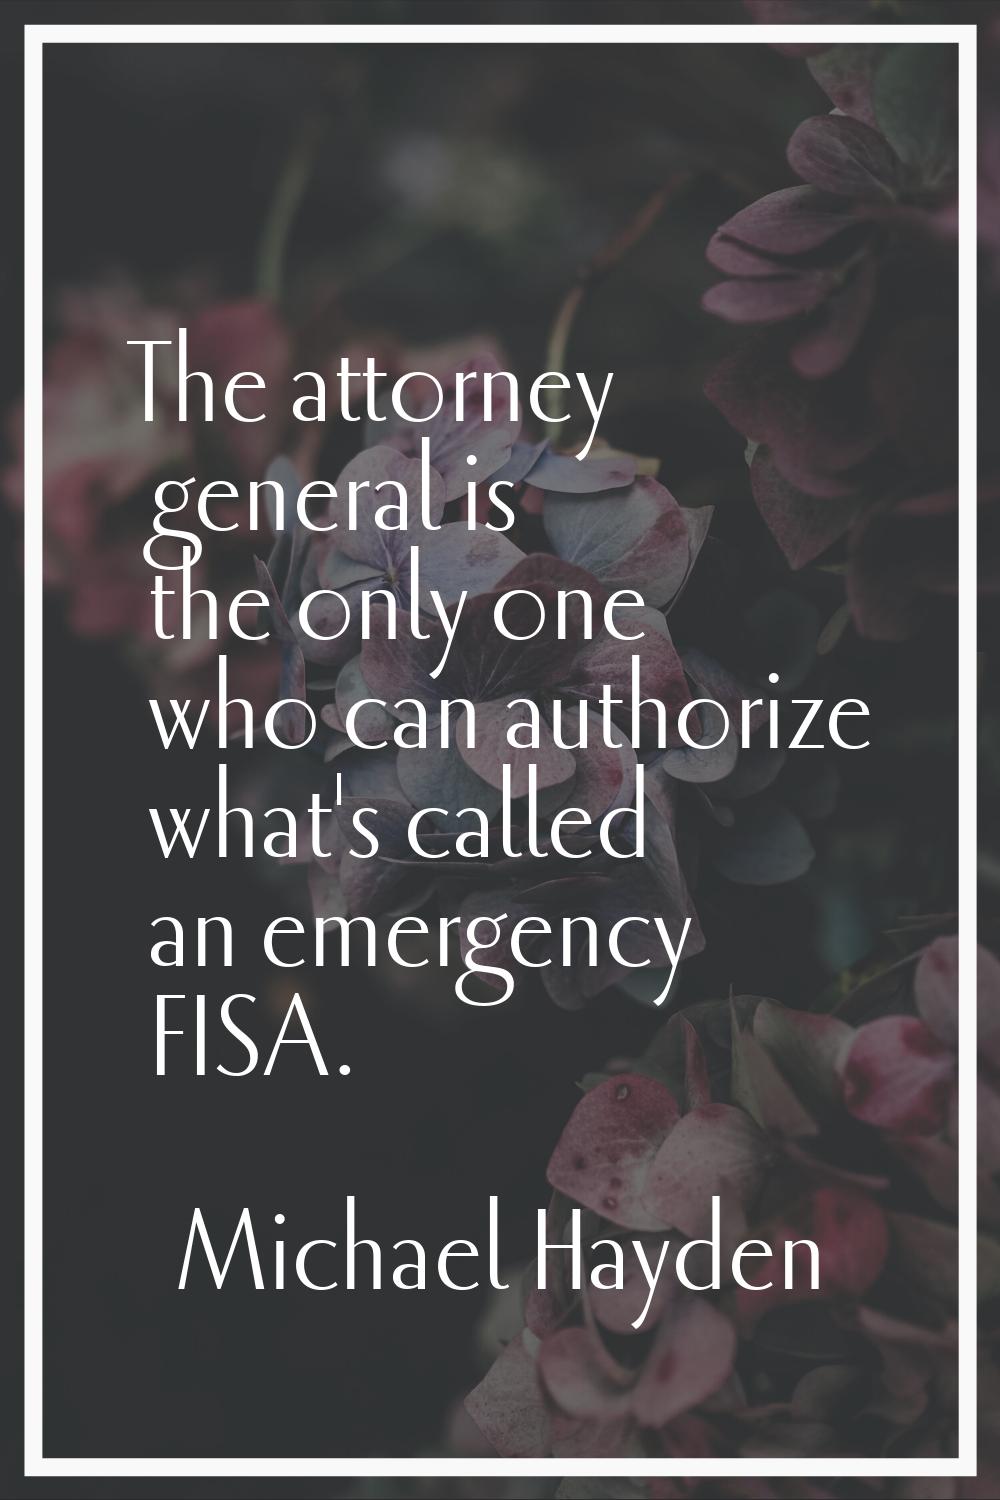 The attorney general is the only one who can authorize what's called an emergency FISA.